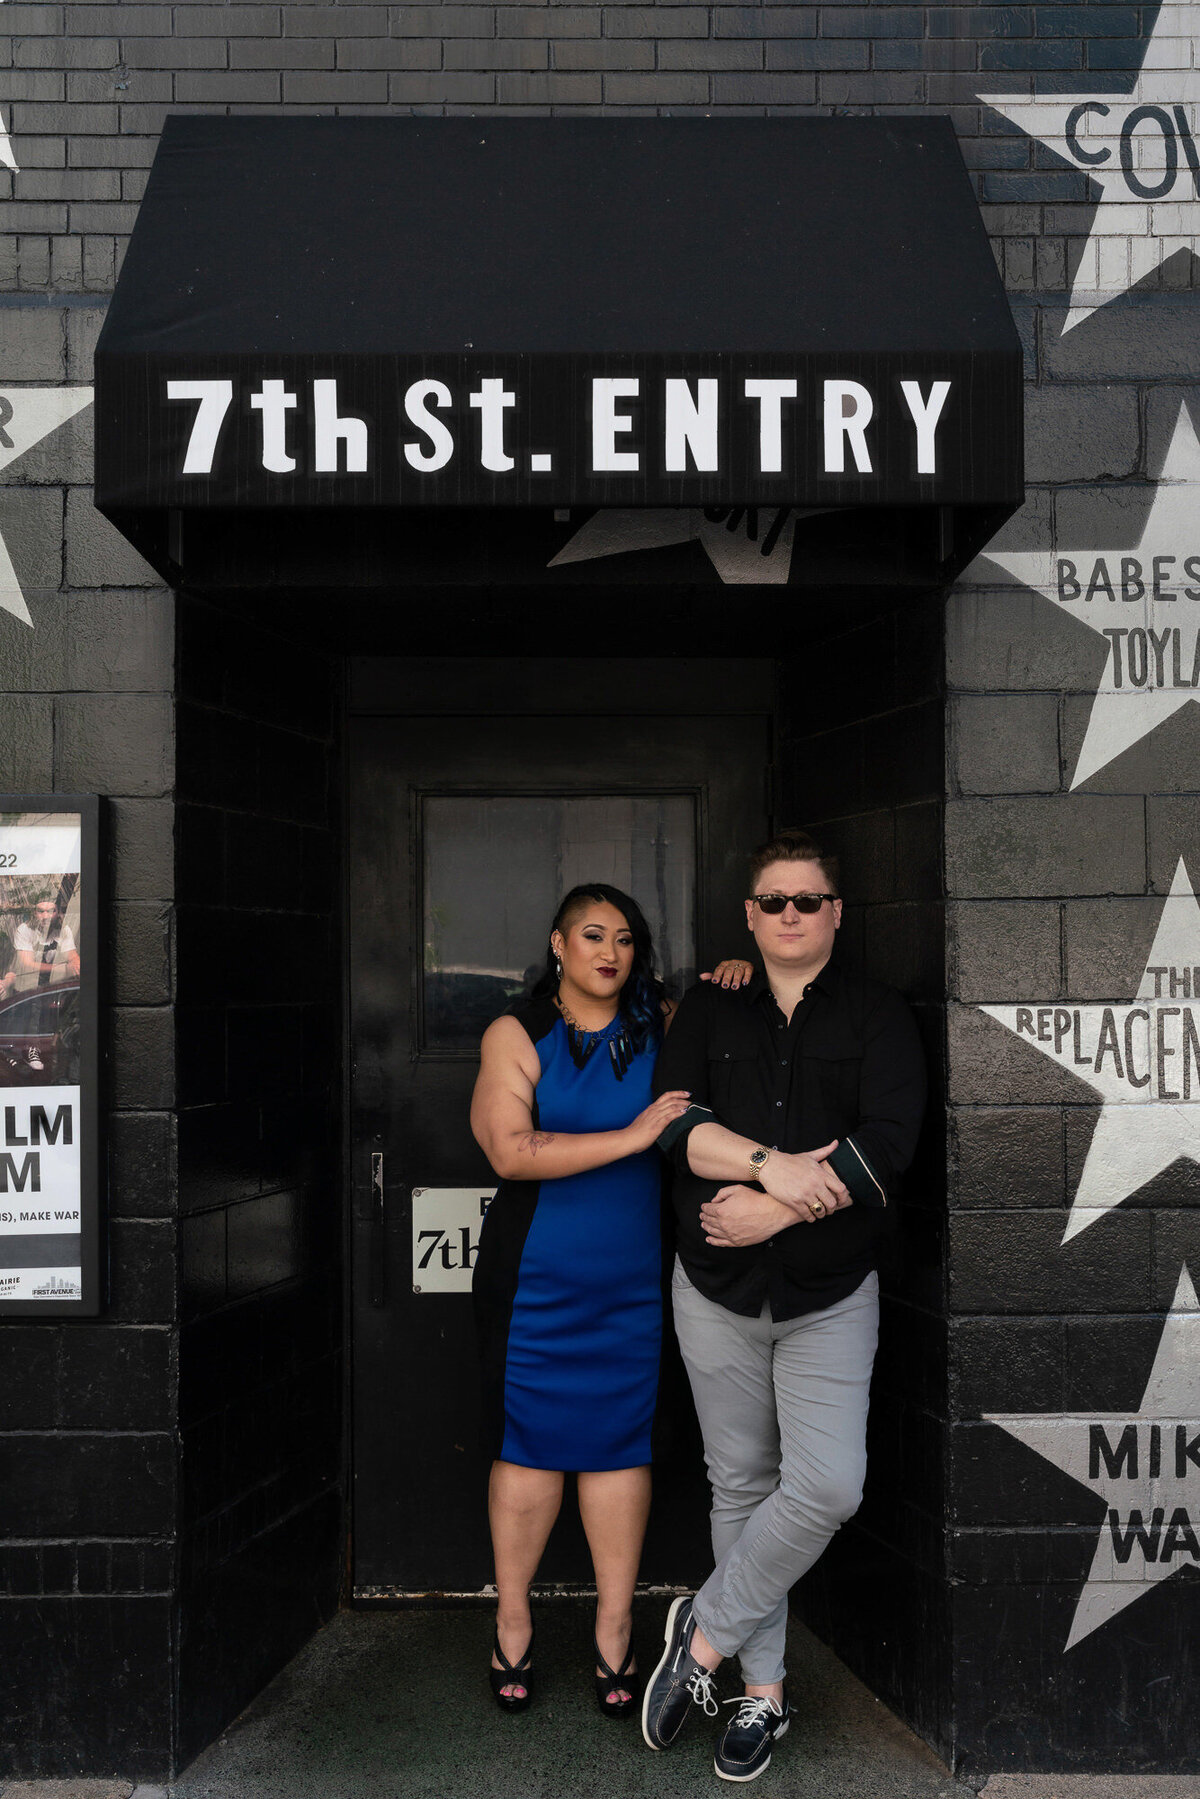 Liz and Phelan - Minnesota Engagement Photography - Minneapolis - First Avenue - Mill City - RKH Images (167 of 260)